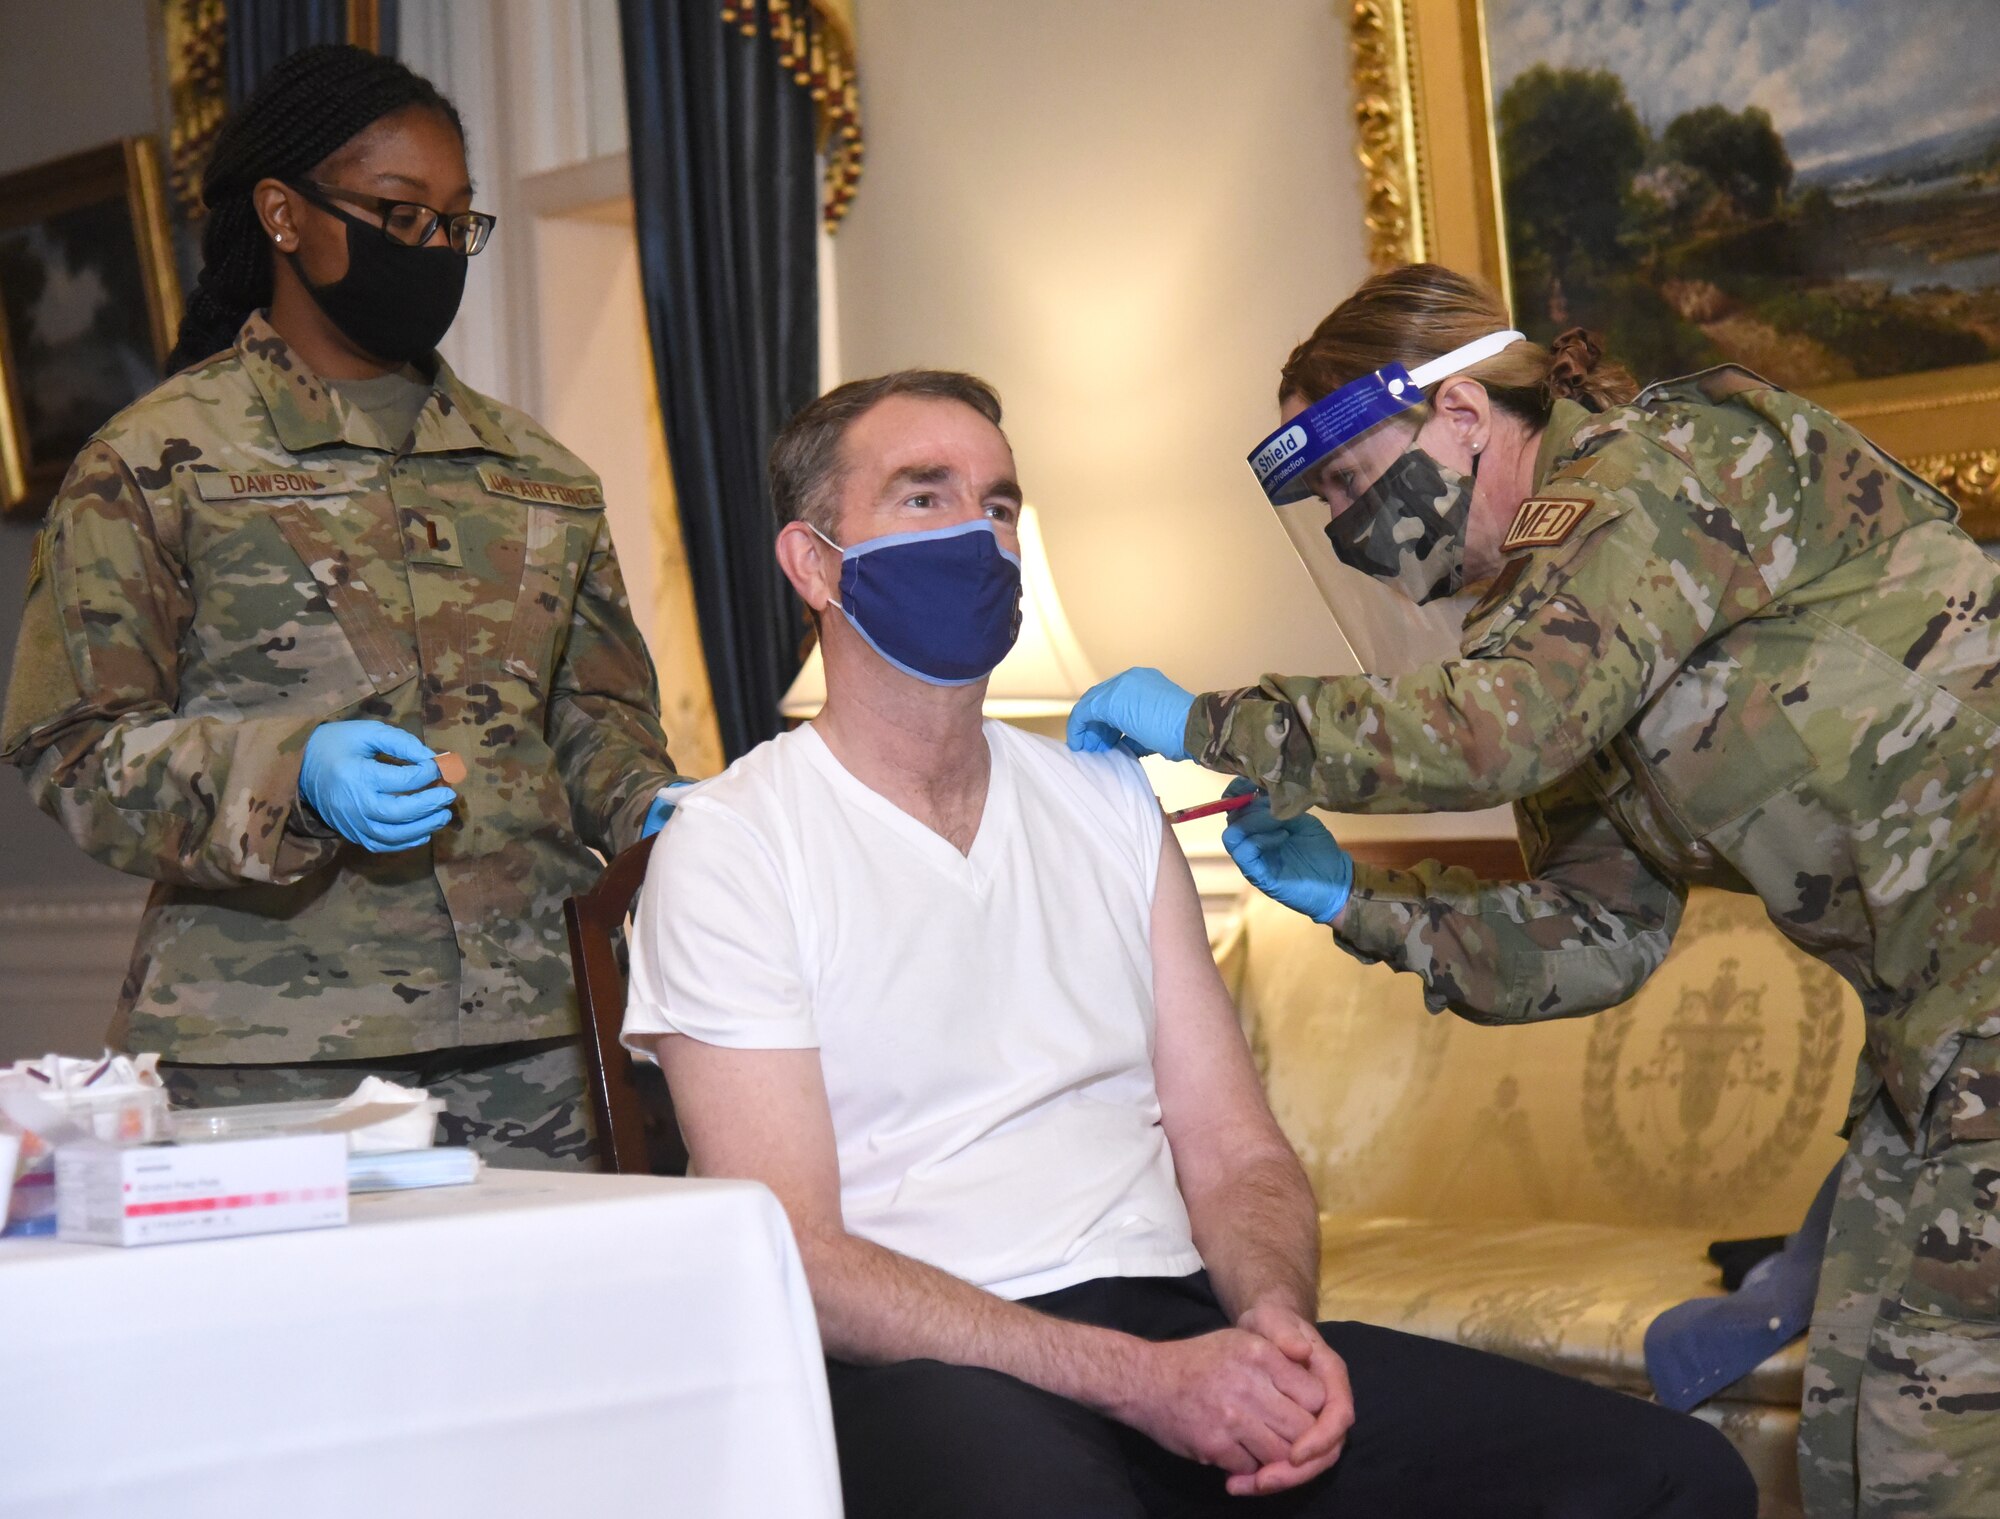 Virginia National Guard personnel administer the COVID-19 vaccine to Virginia Gov. Ralph Northam and Virginia First Lady Pamela Northam March 15, 2021, at the Executive Mansion in Richmond, Virginia.